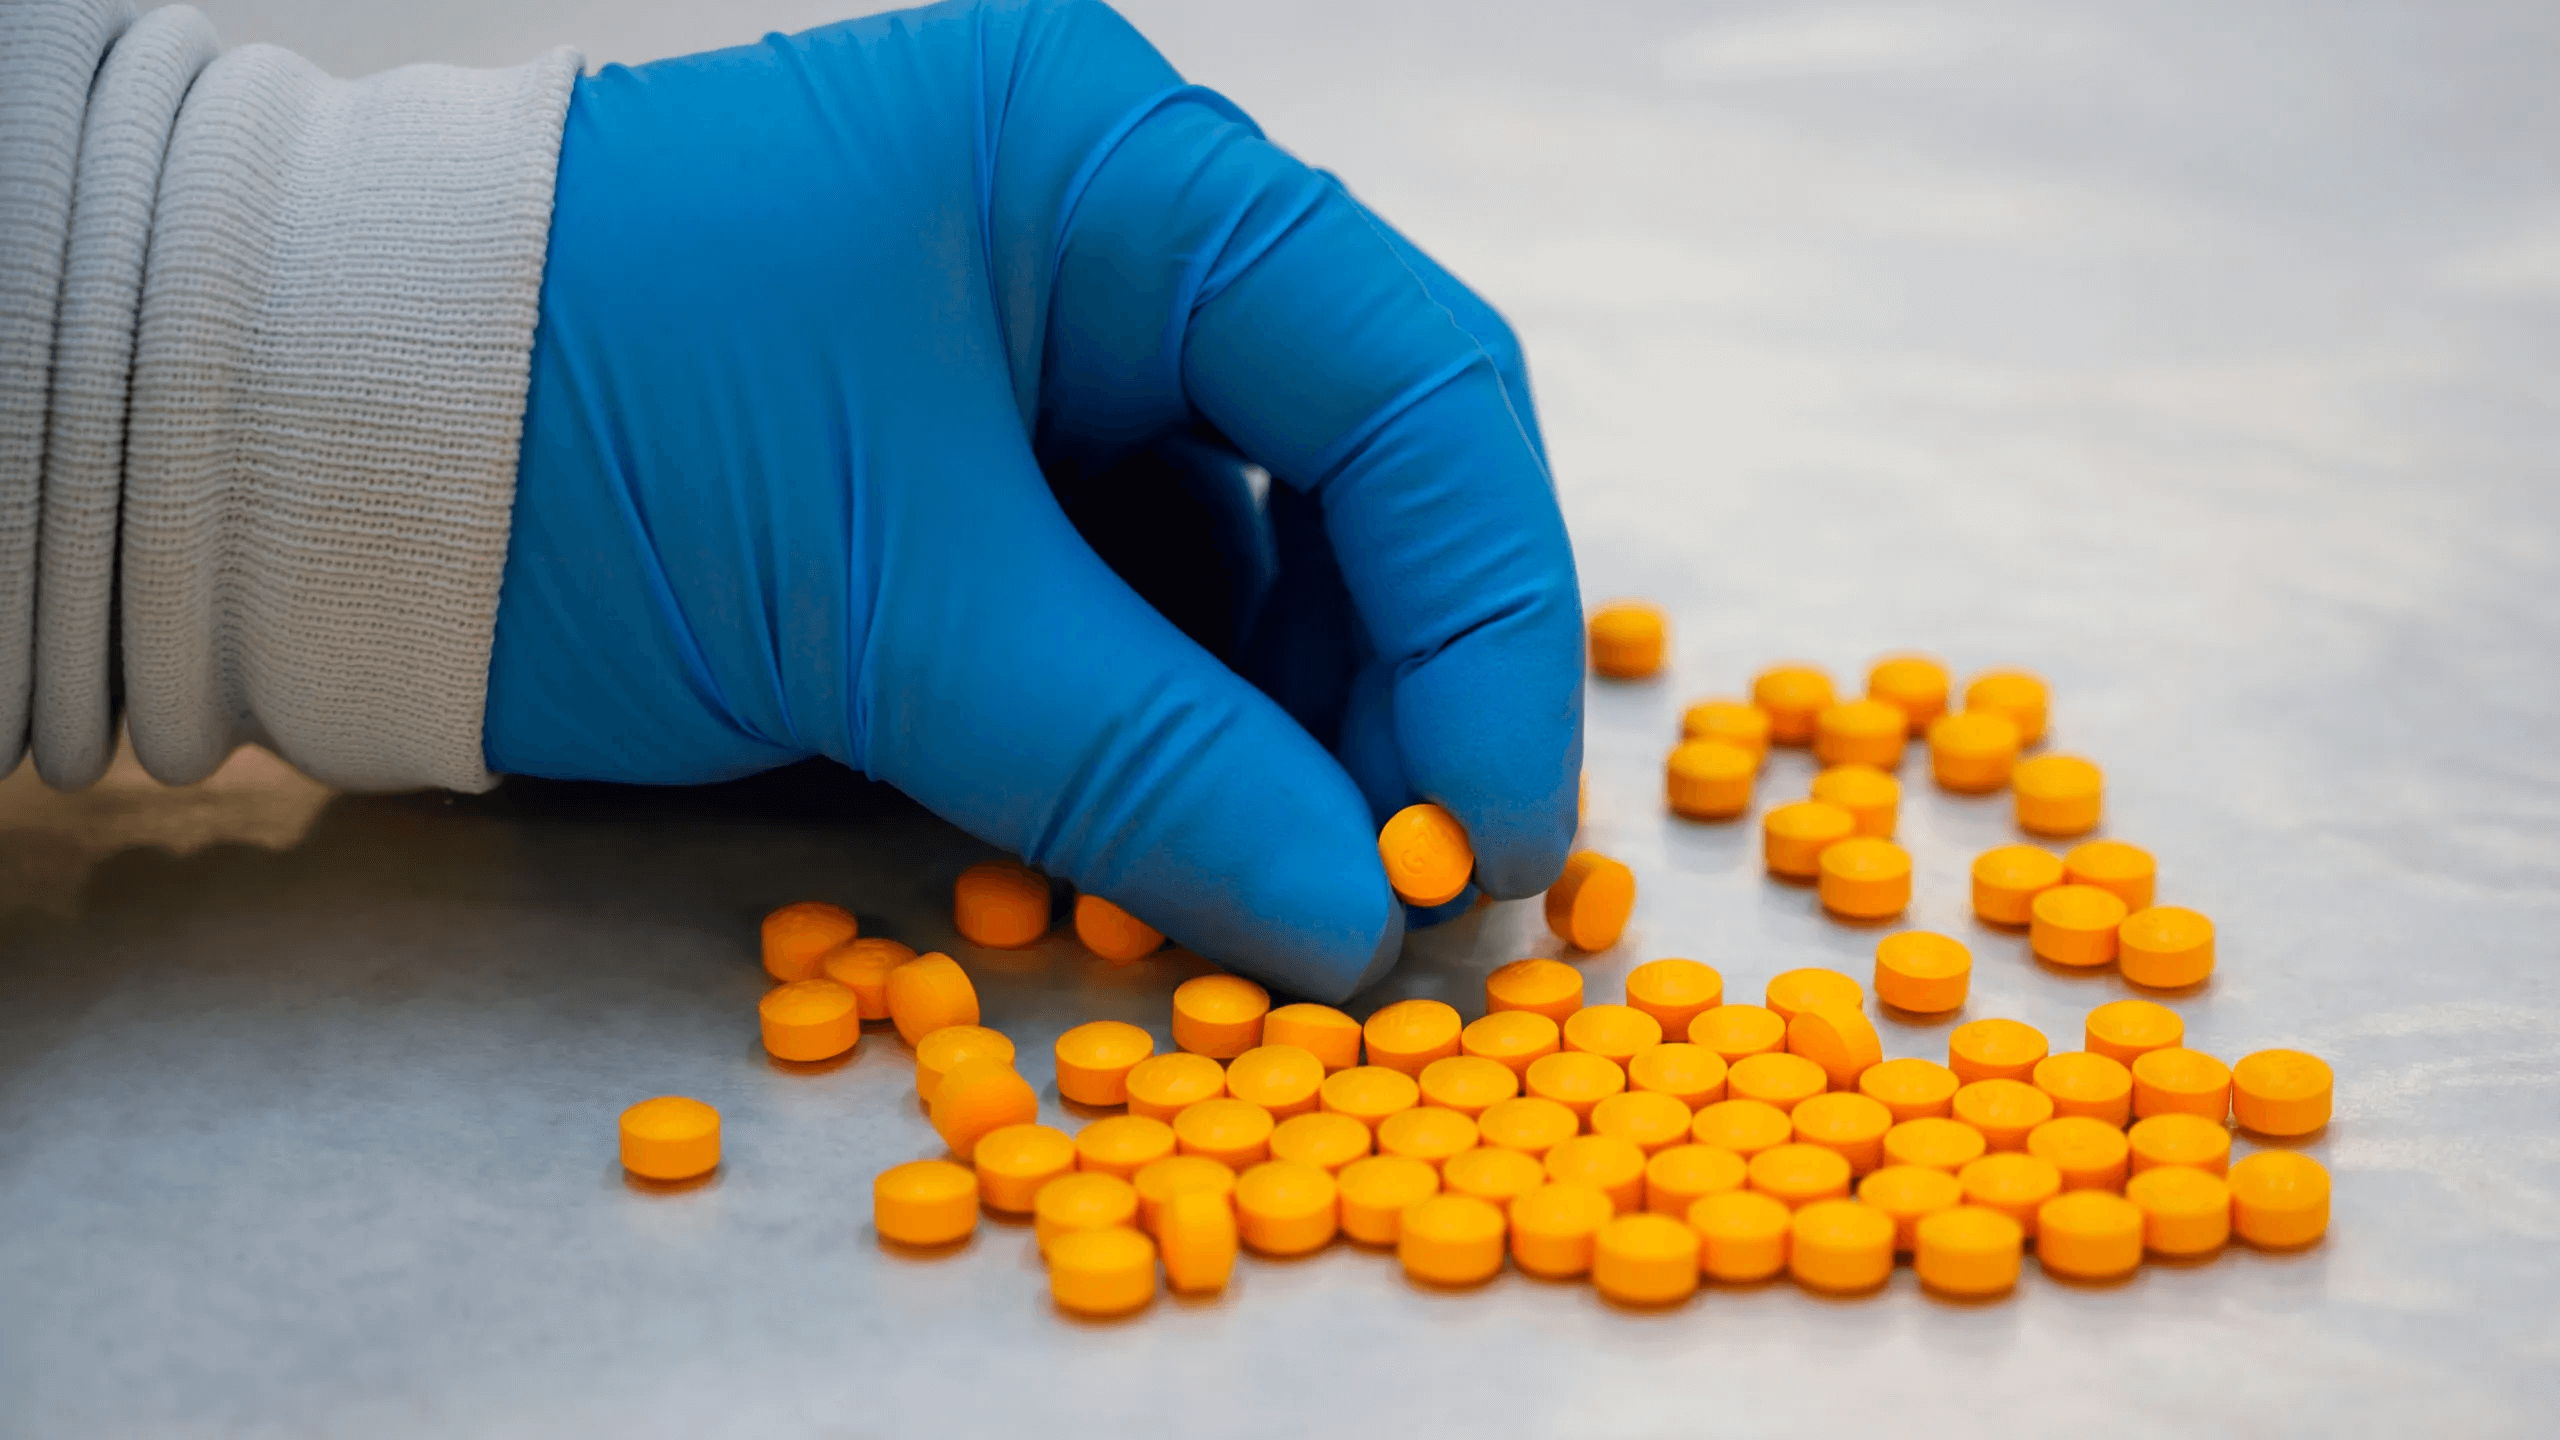 A hand in blue glove holding a pile of orange pills.